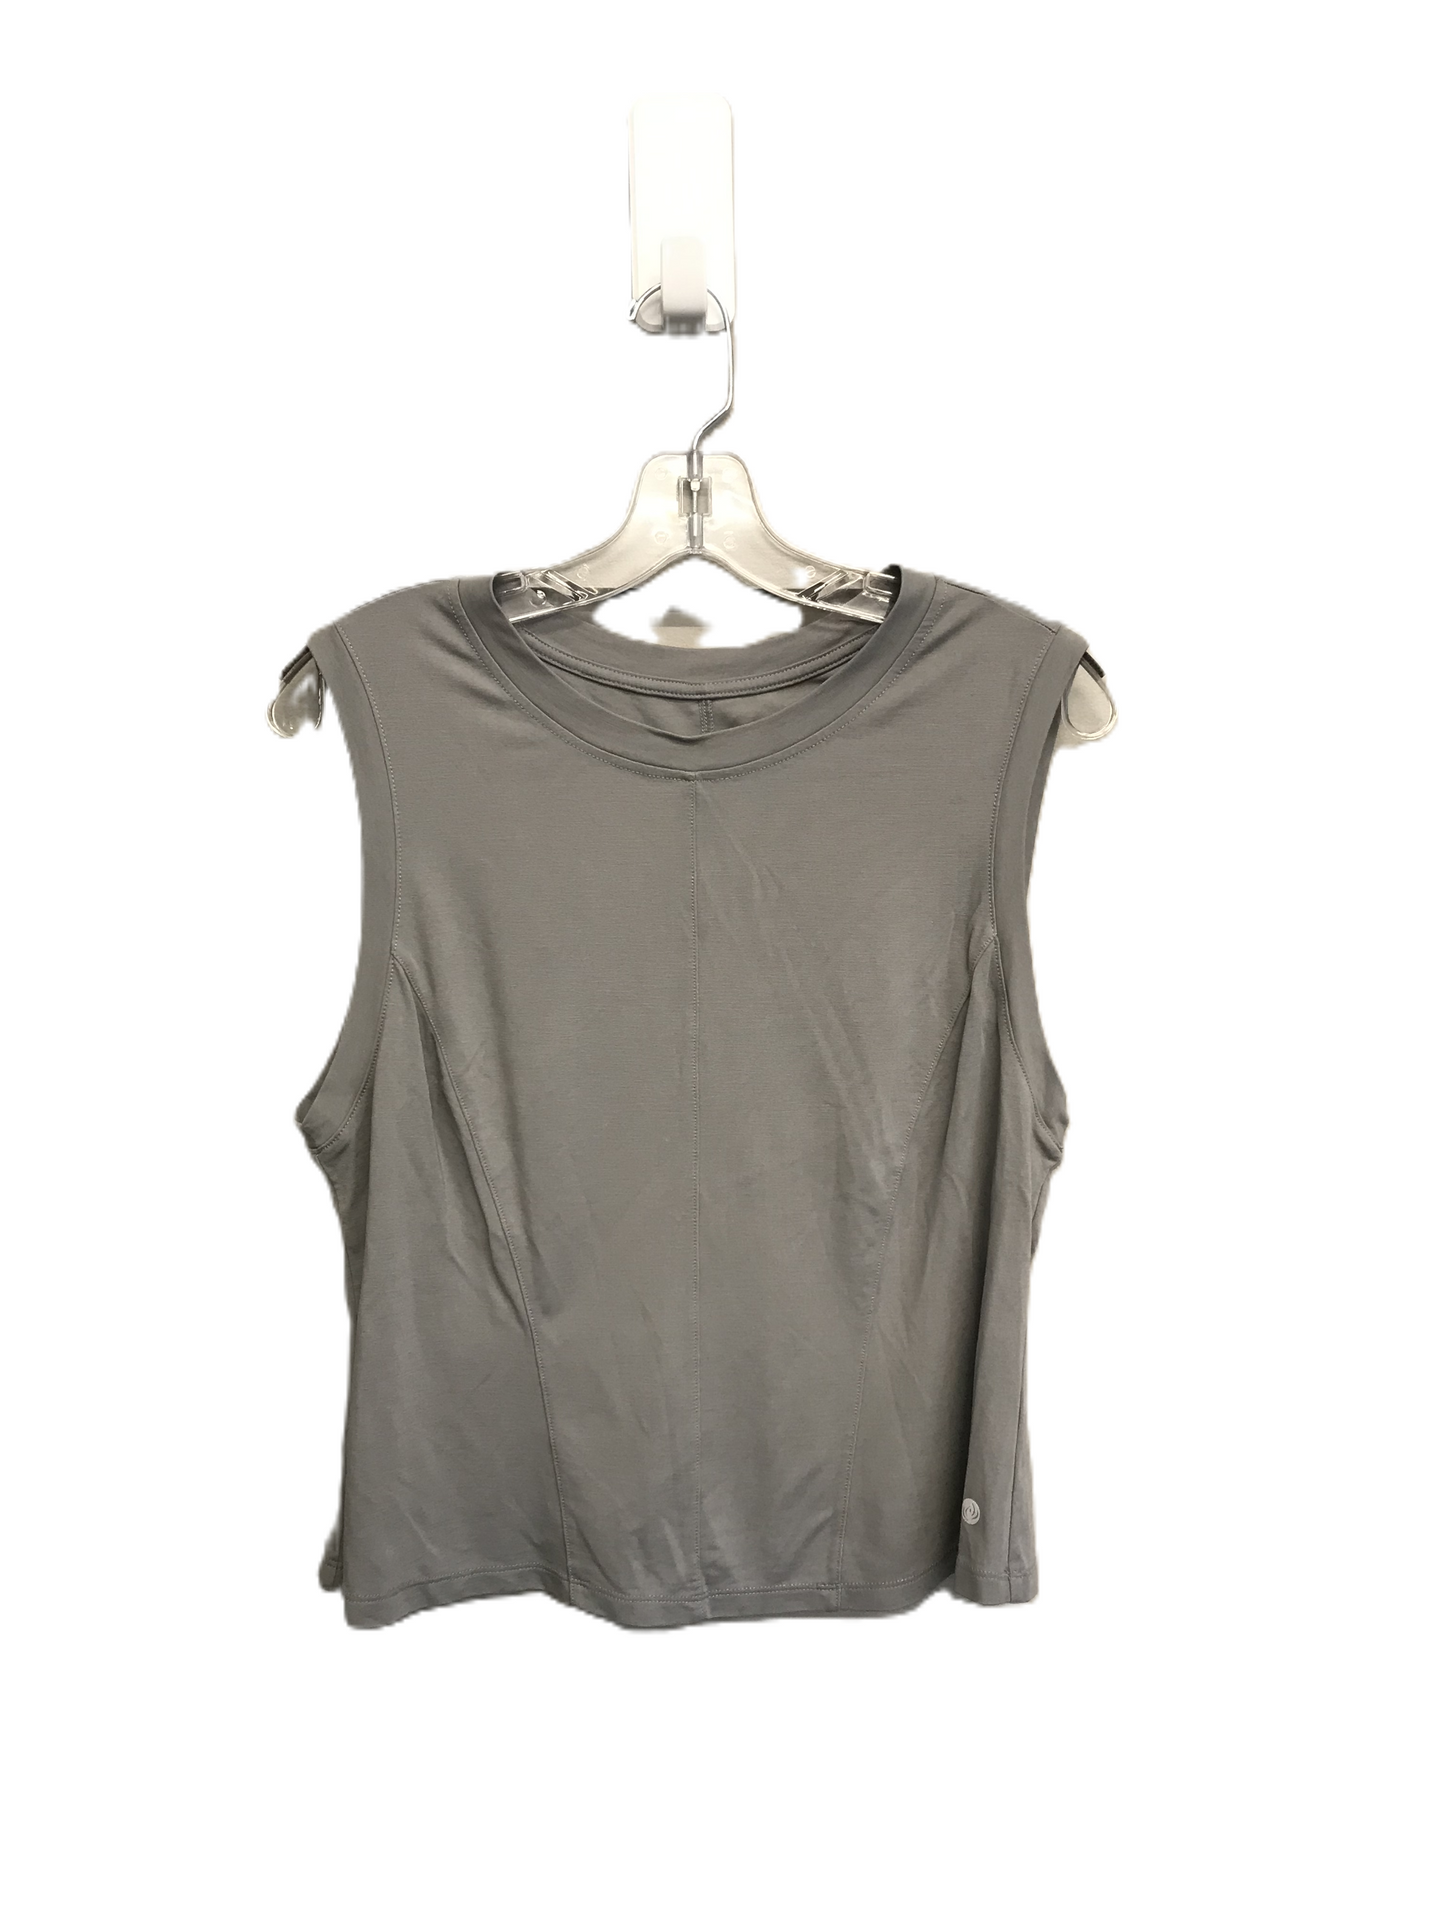 Grey Athletic Tank Top By Apana, Size: L